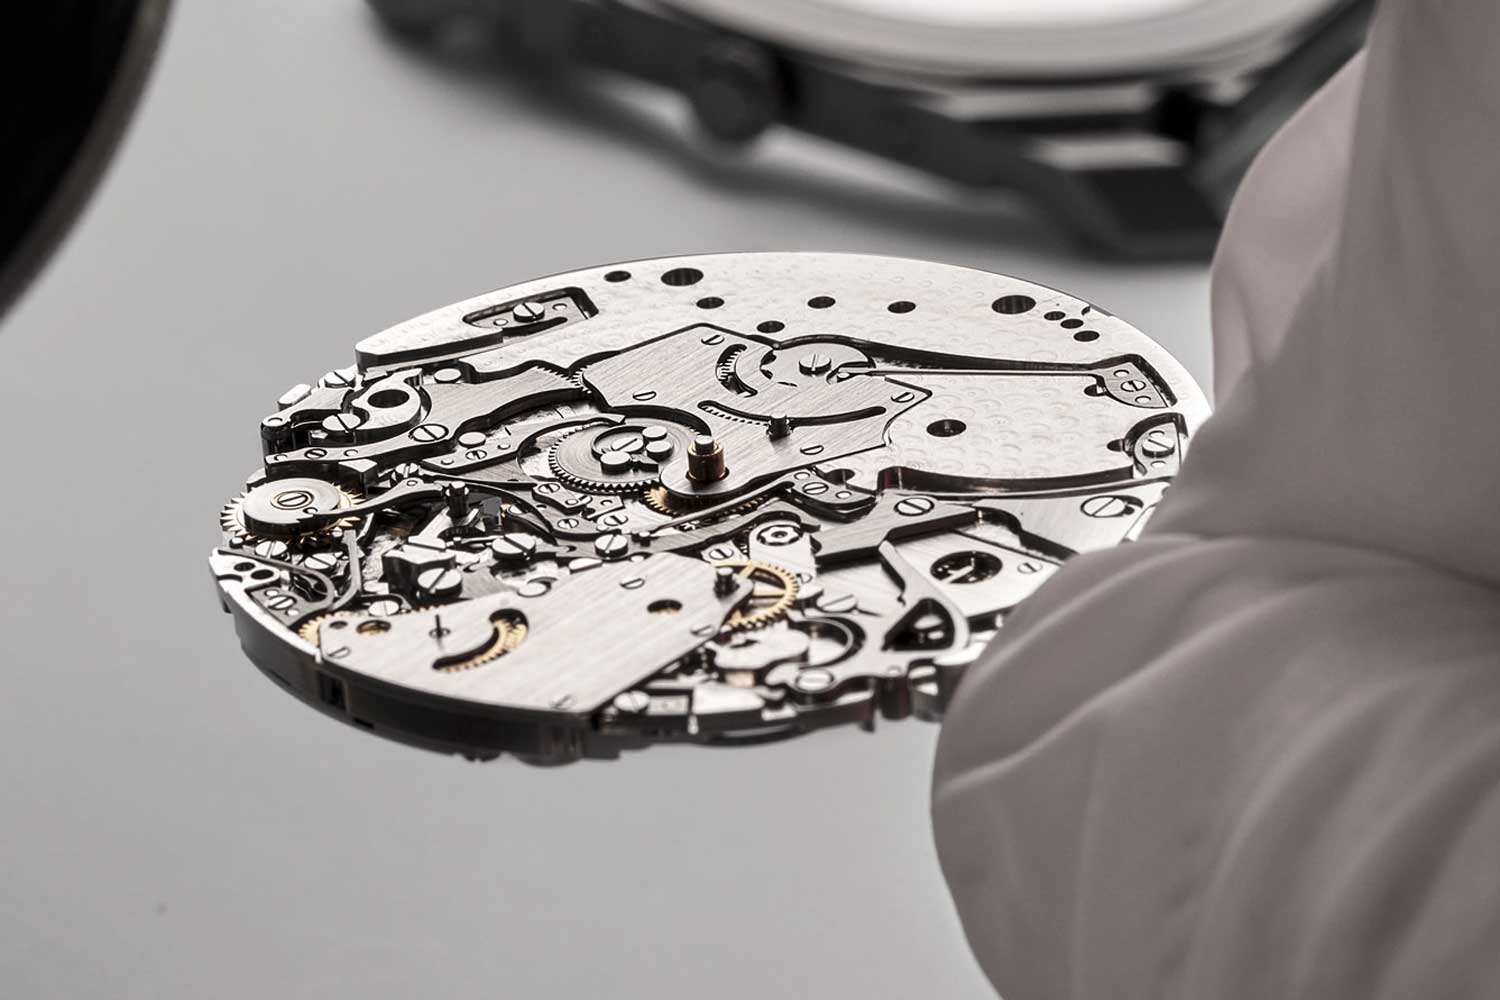 For the Octo Finissimo Perpetual Calendar, Bvlgari made their own micro-rotor driven movement, which is all of 2.75mm in thickness and which fits in a case that is an incredible 5.8mm in thickness.